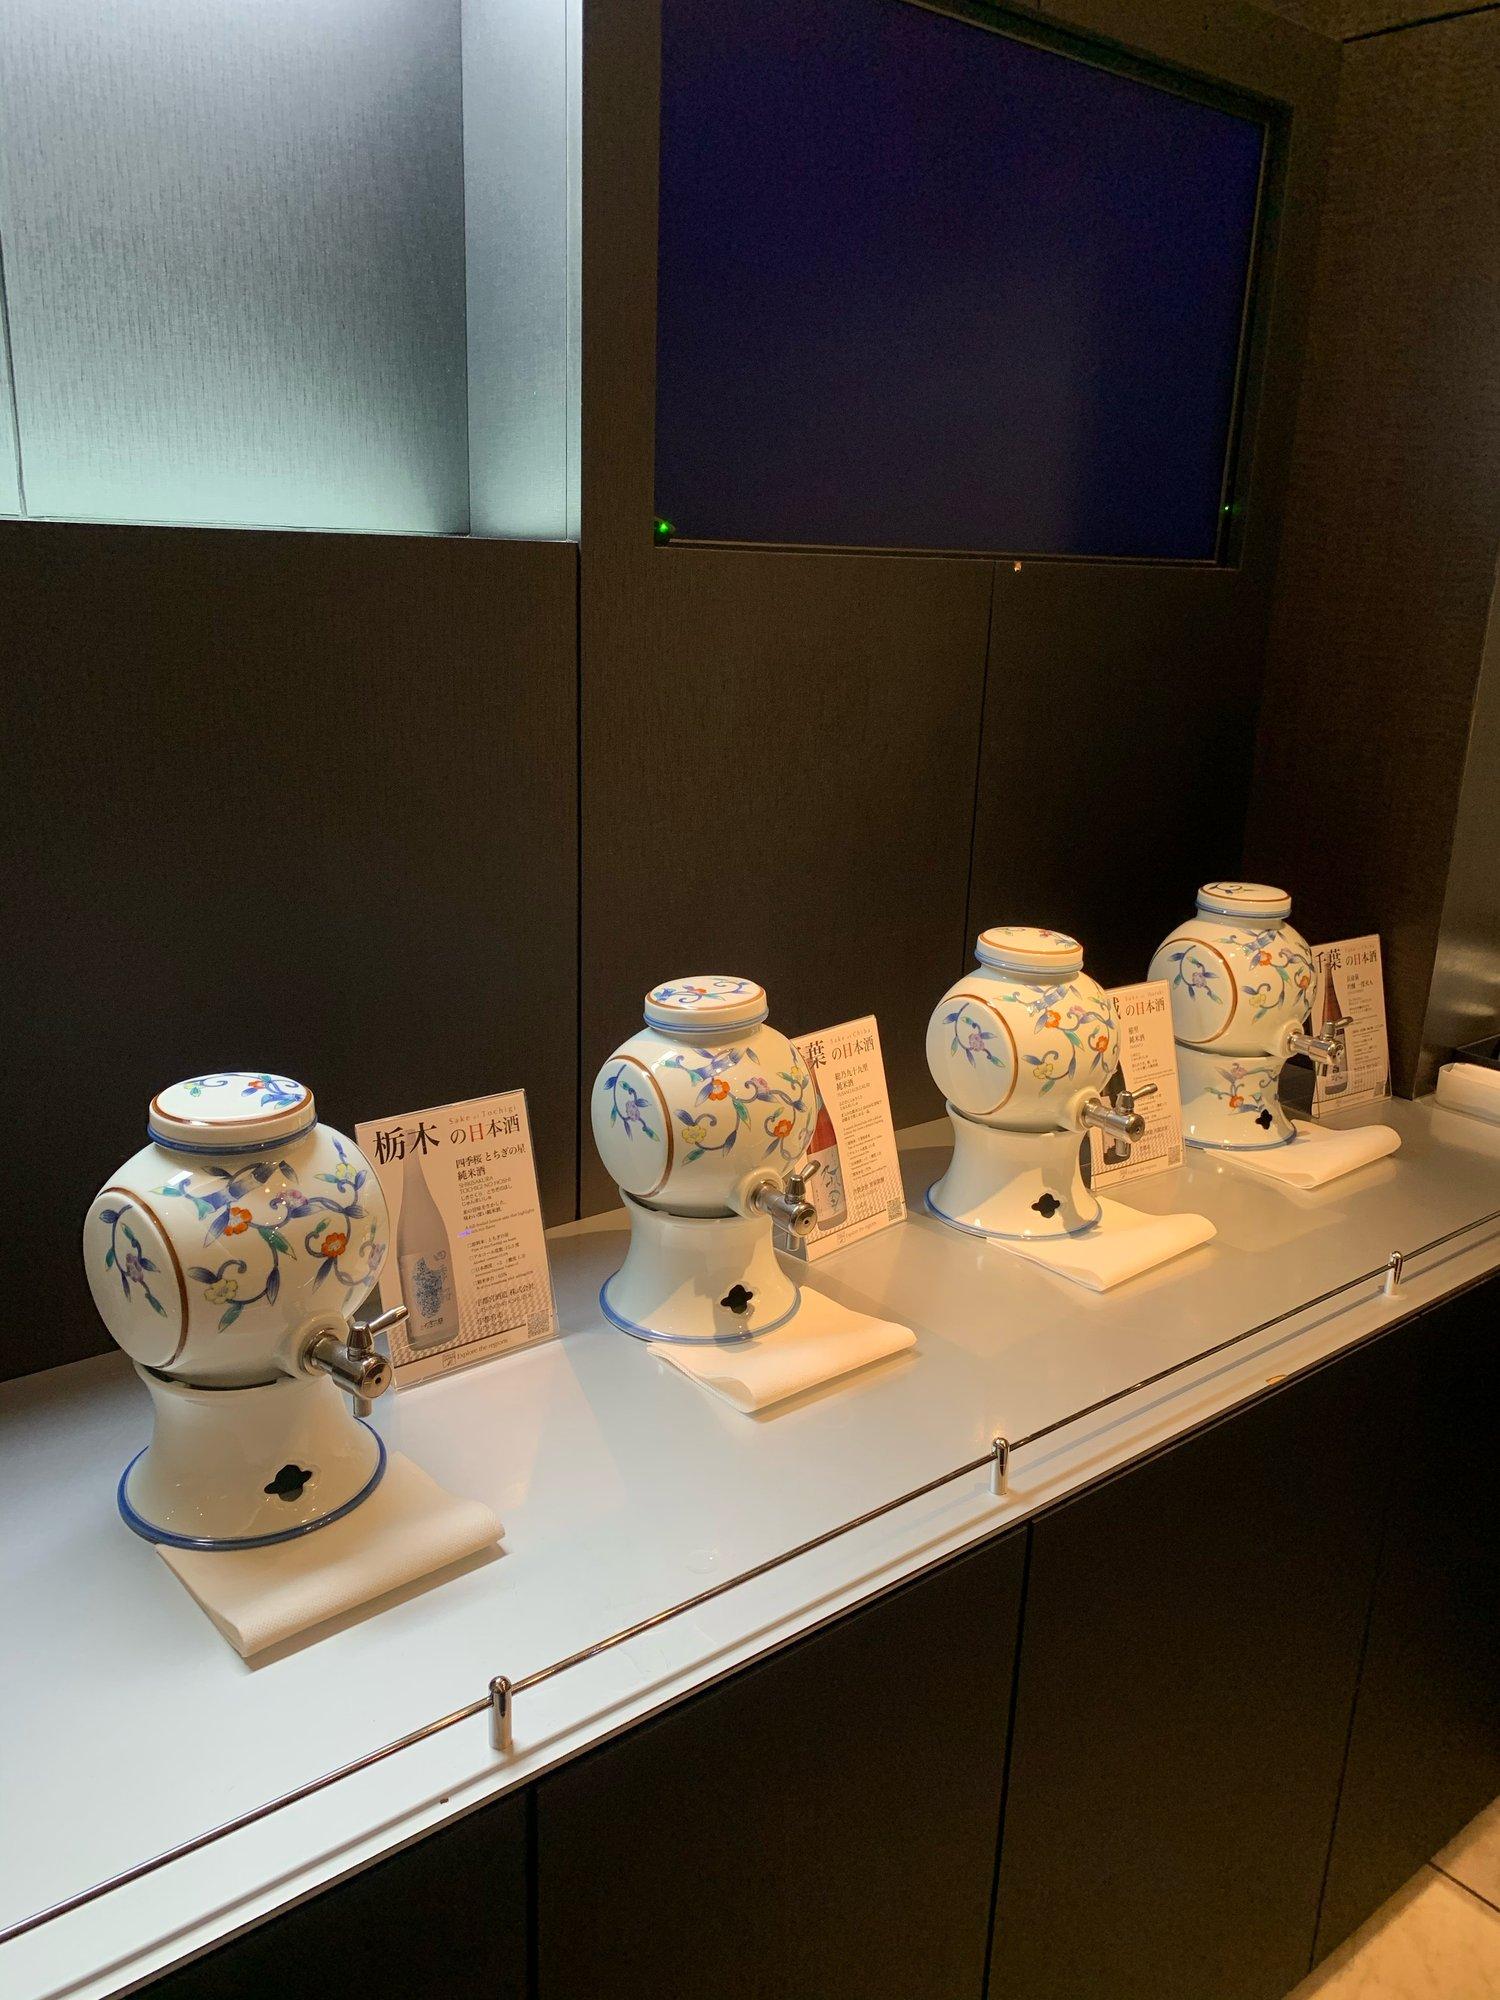 All Nippon Airways ANA Lounge image 17 of 39